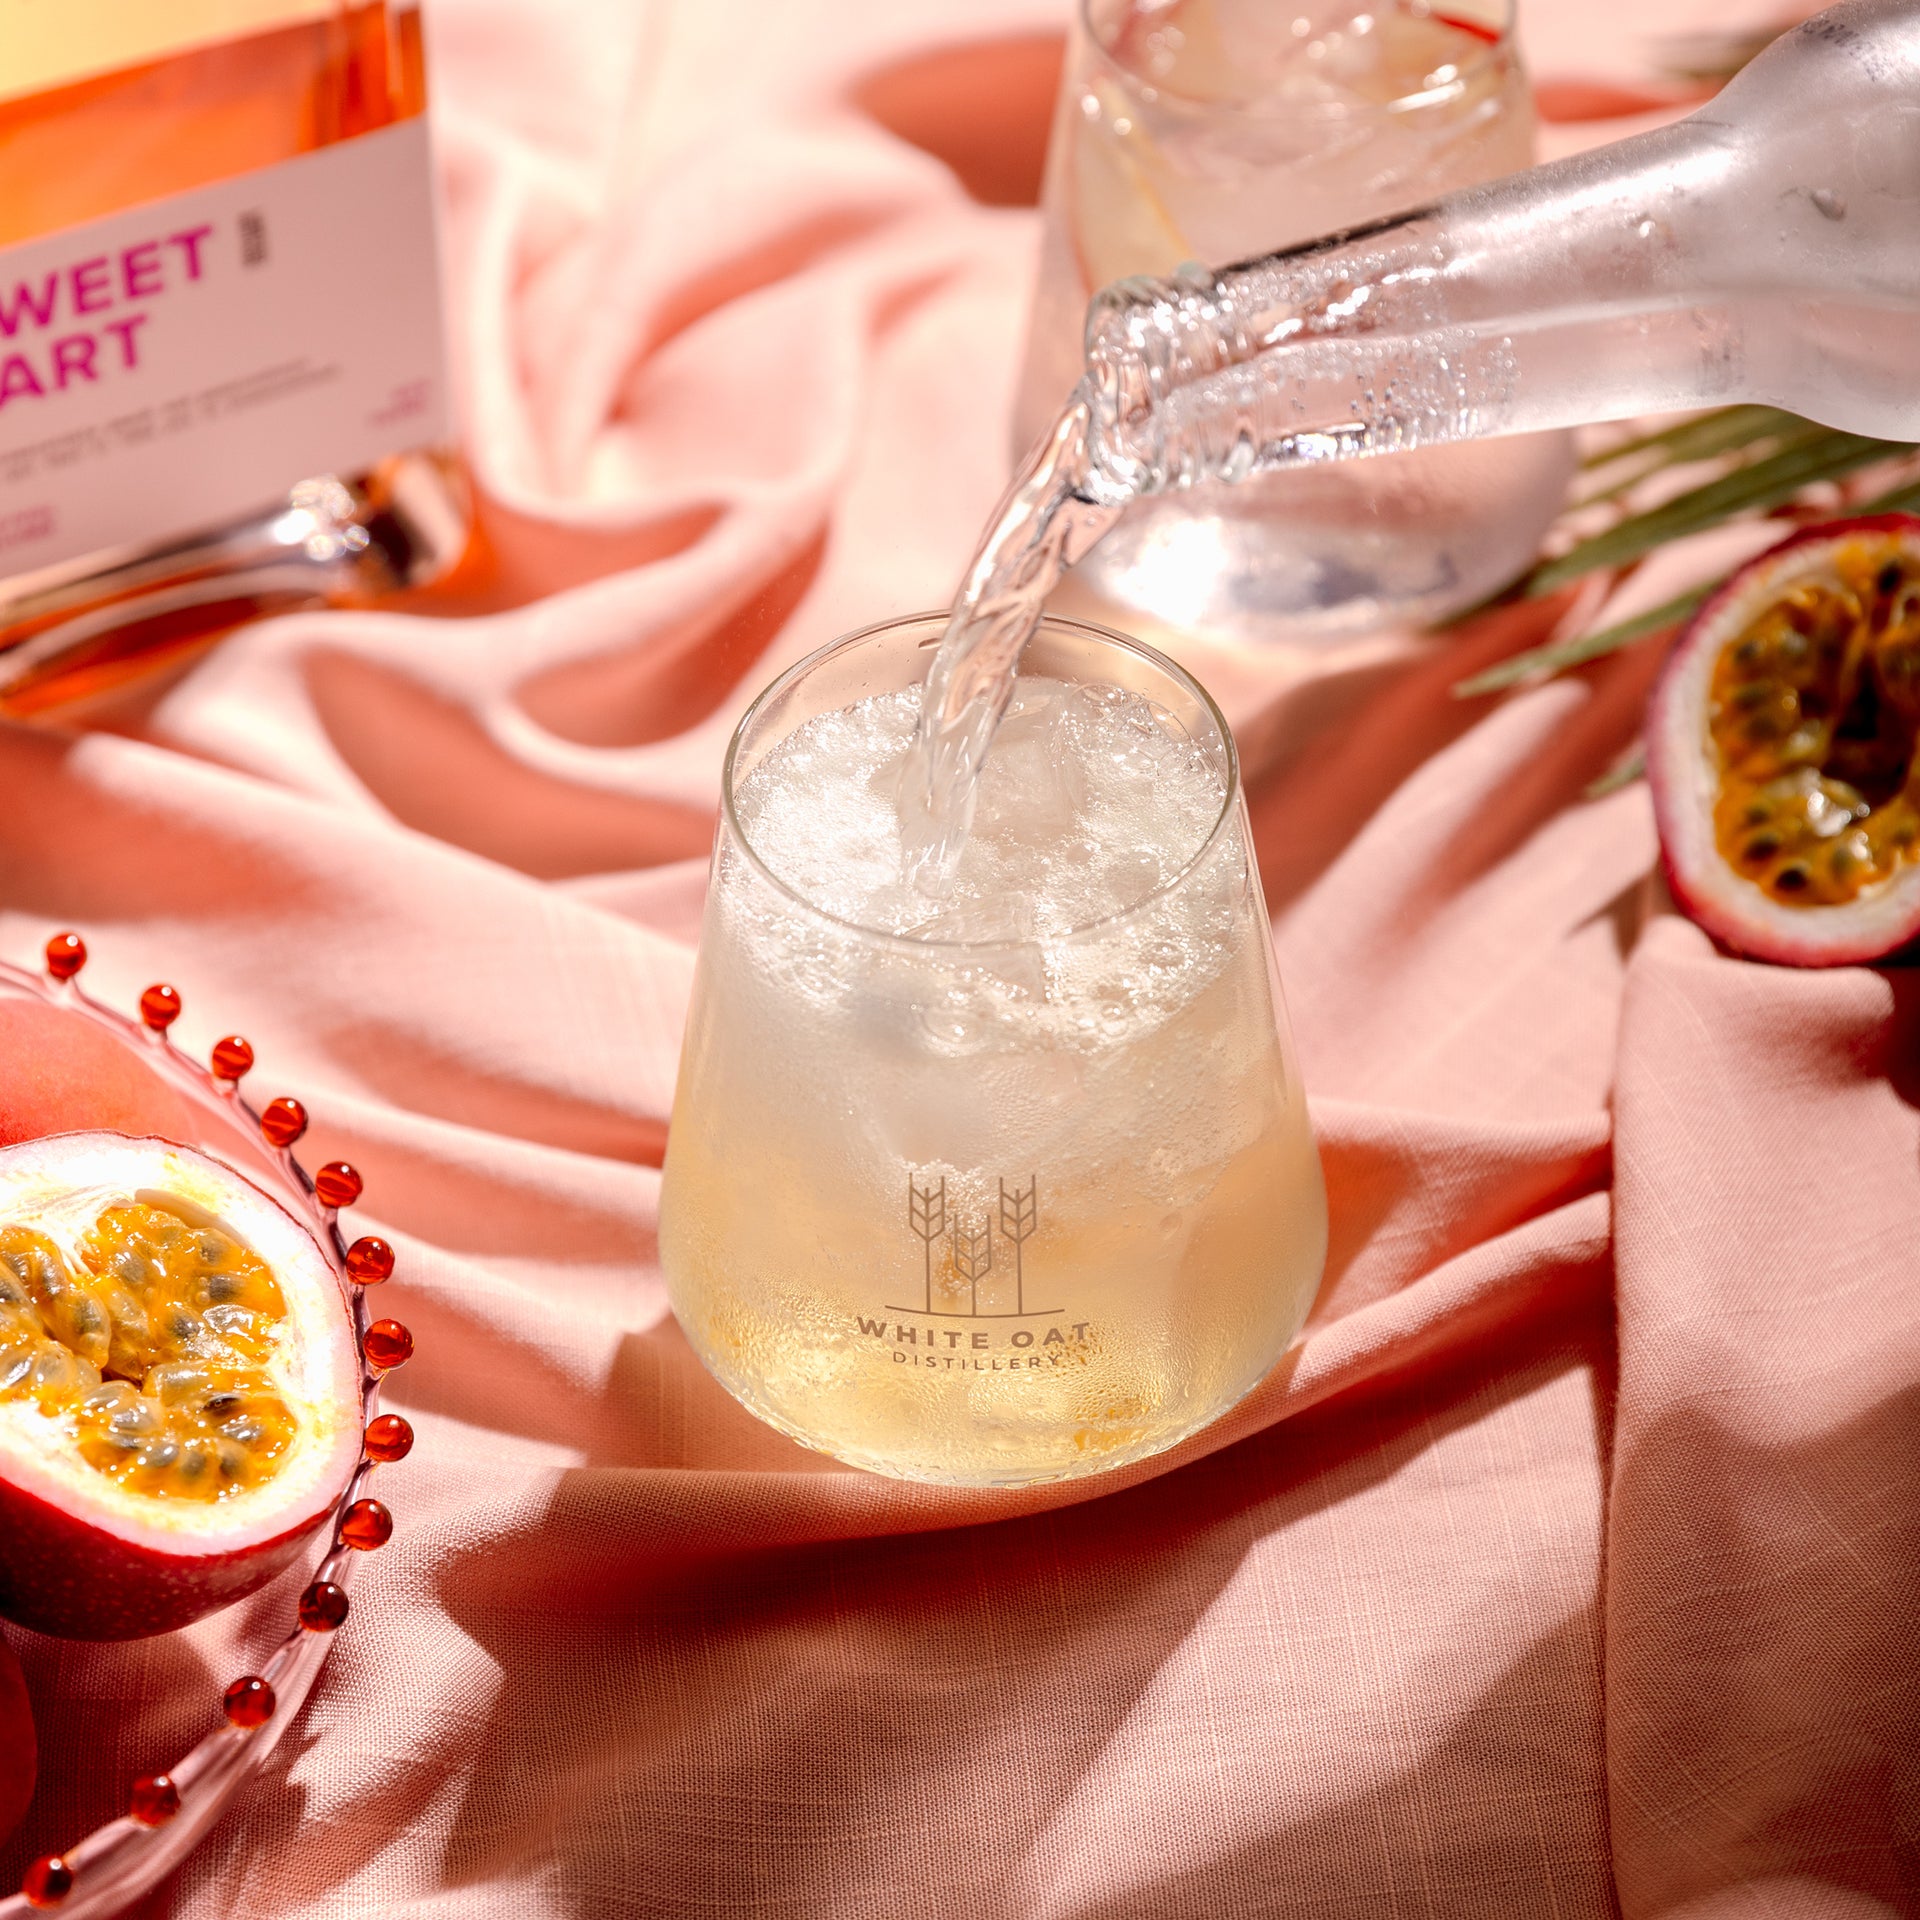 Peach & Passionfruit Sour Gin